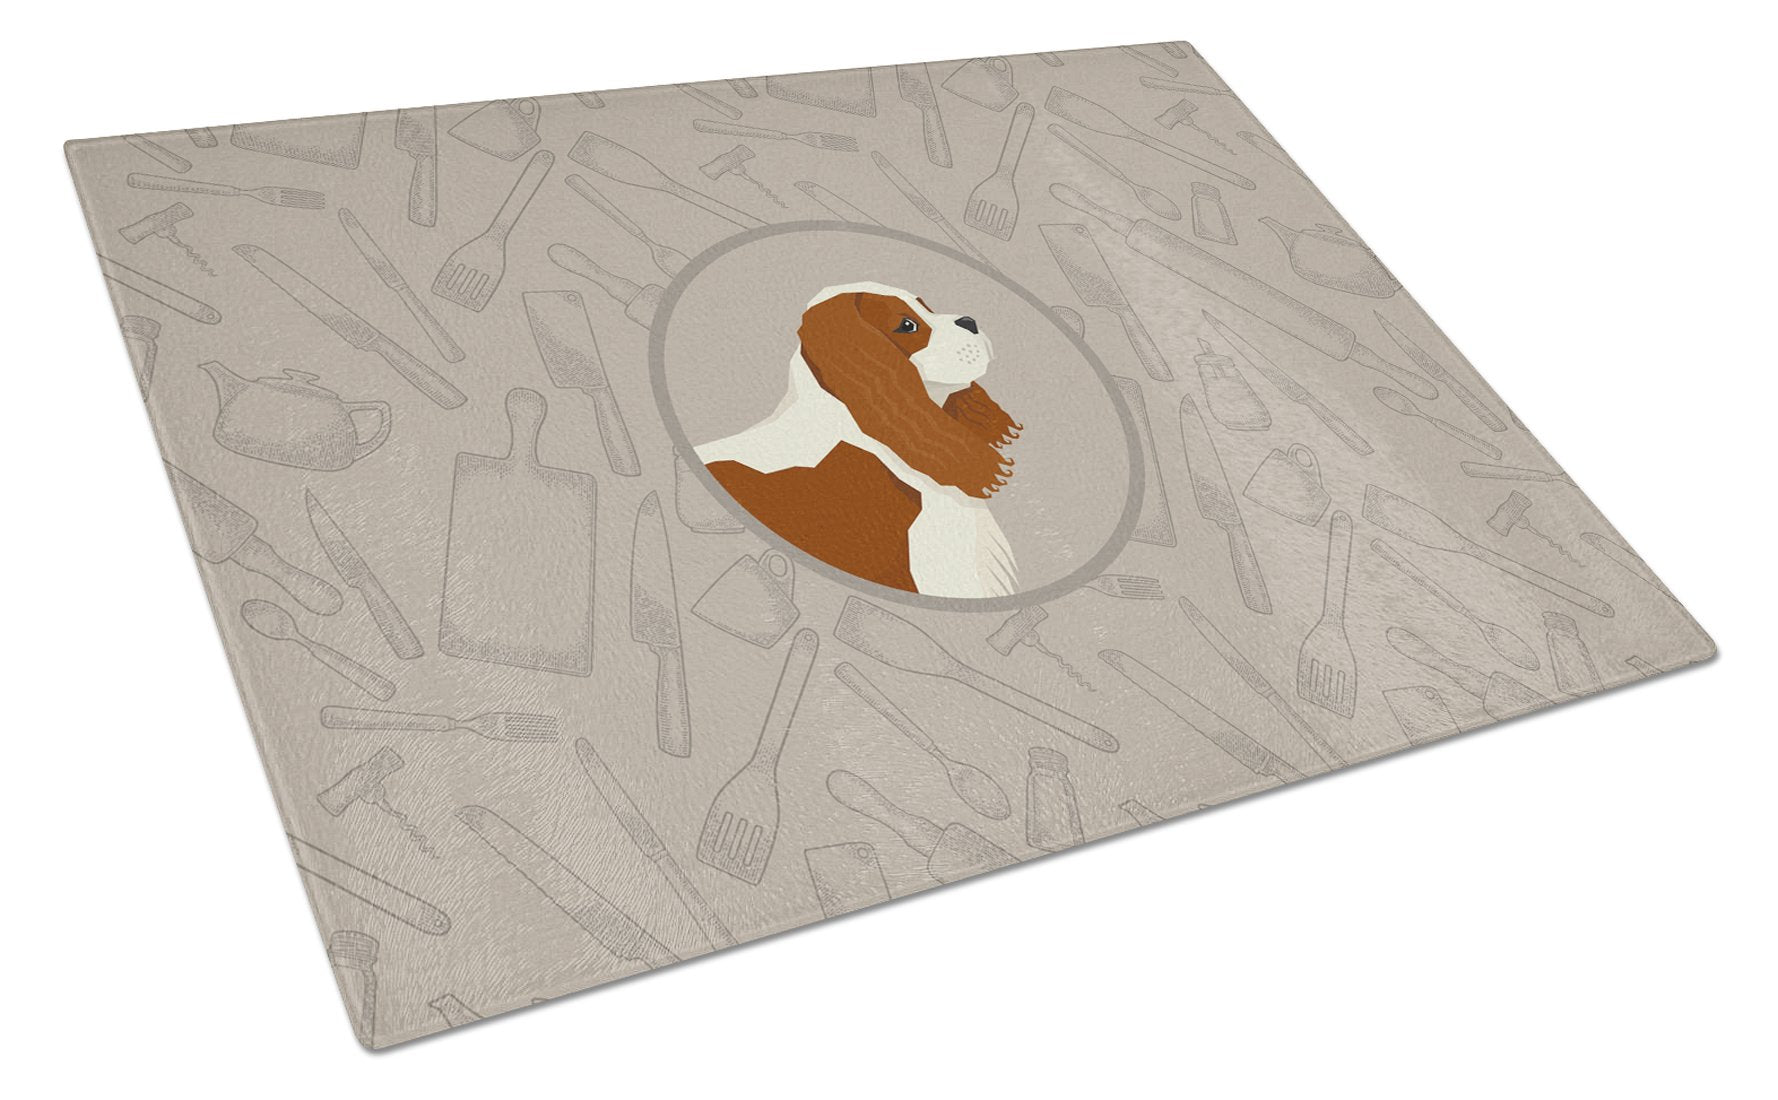 Cavalier Spaniel In the Kitchen Glass Cutting Board Large CK2176LCB by Caroline's Treasures